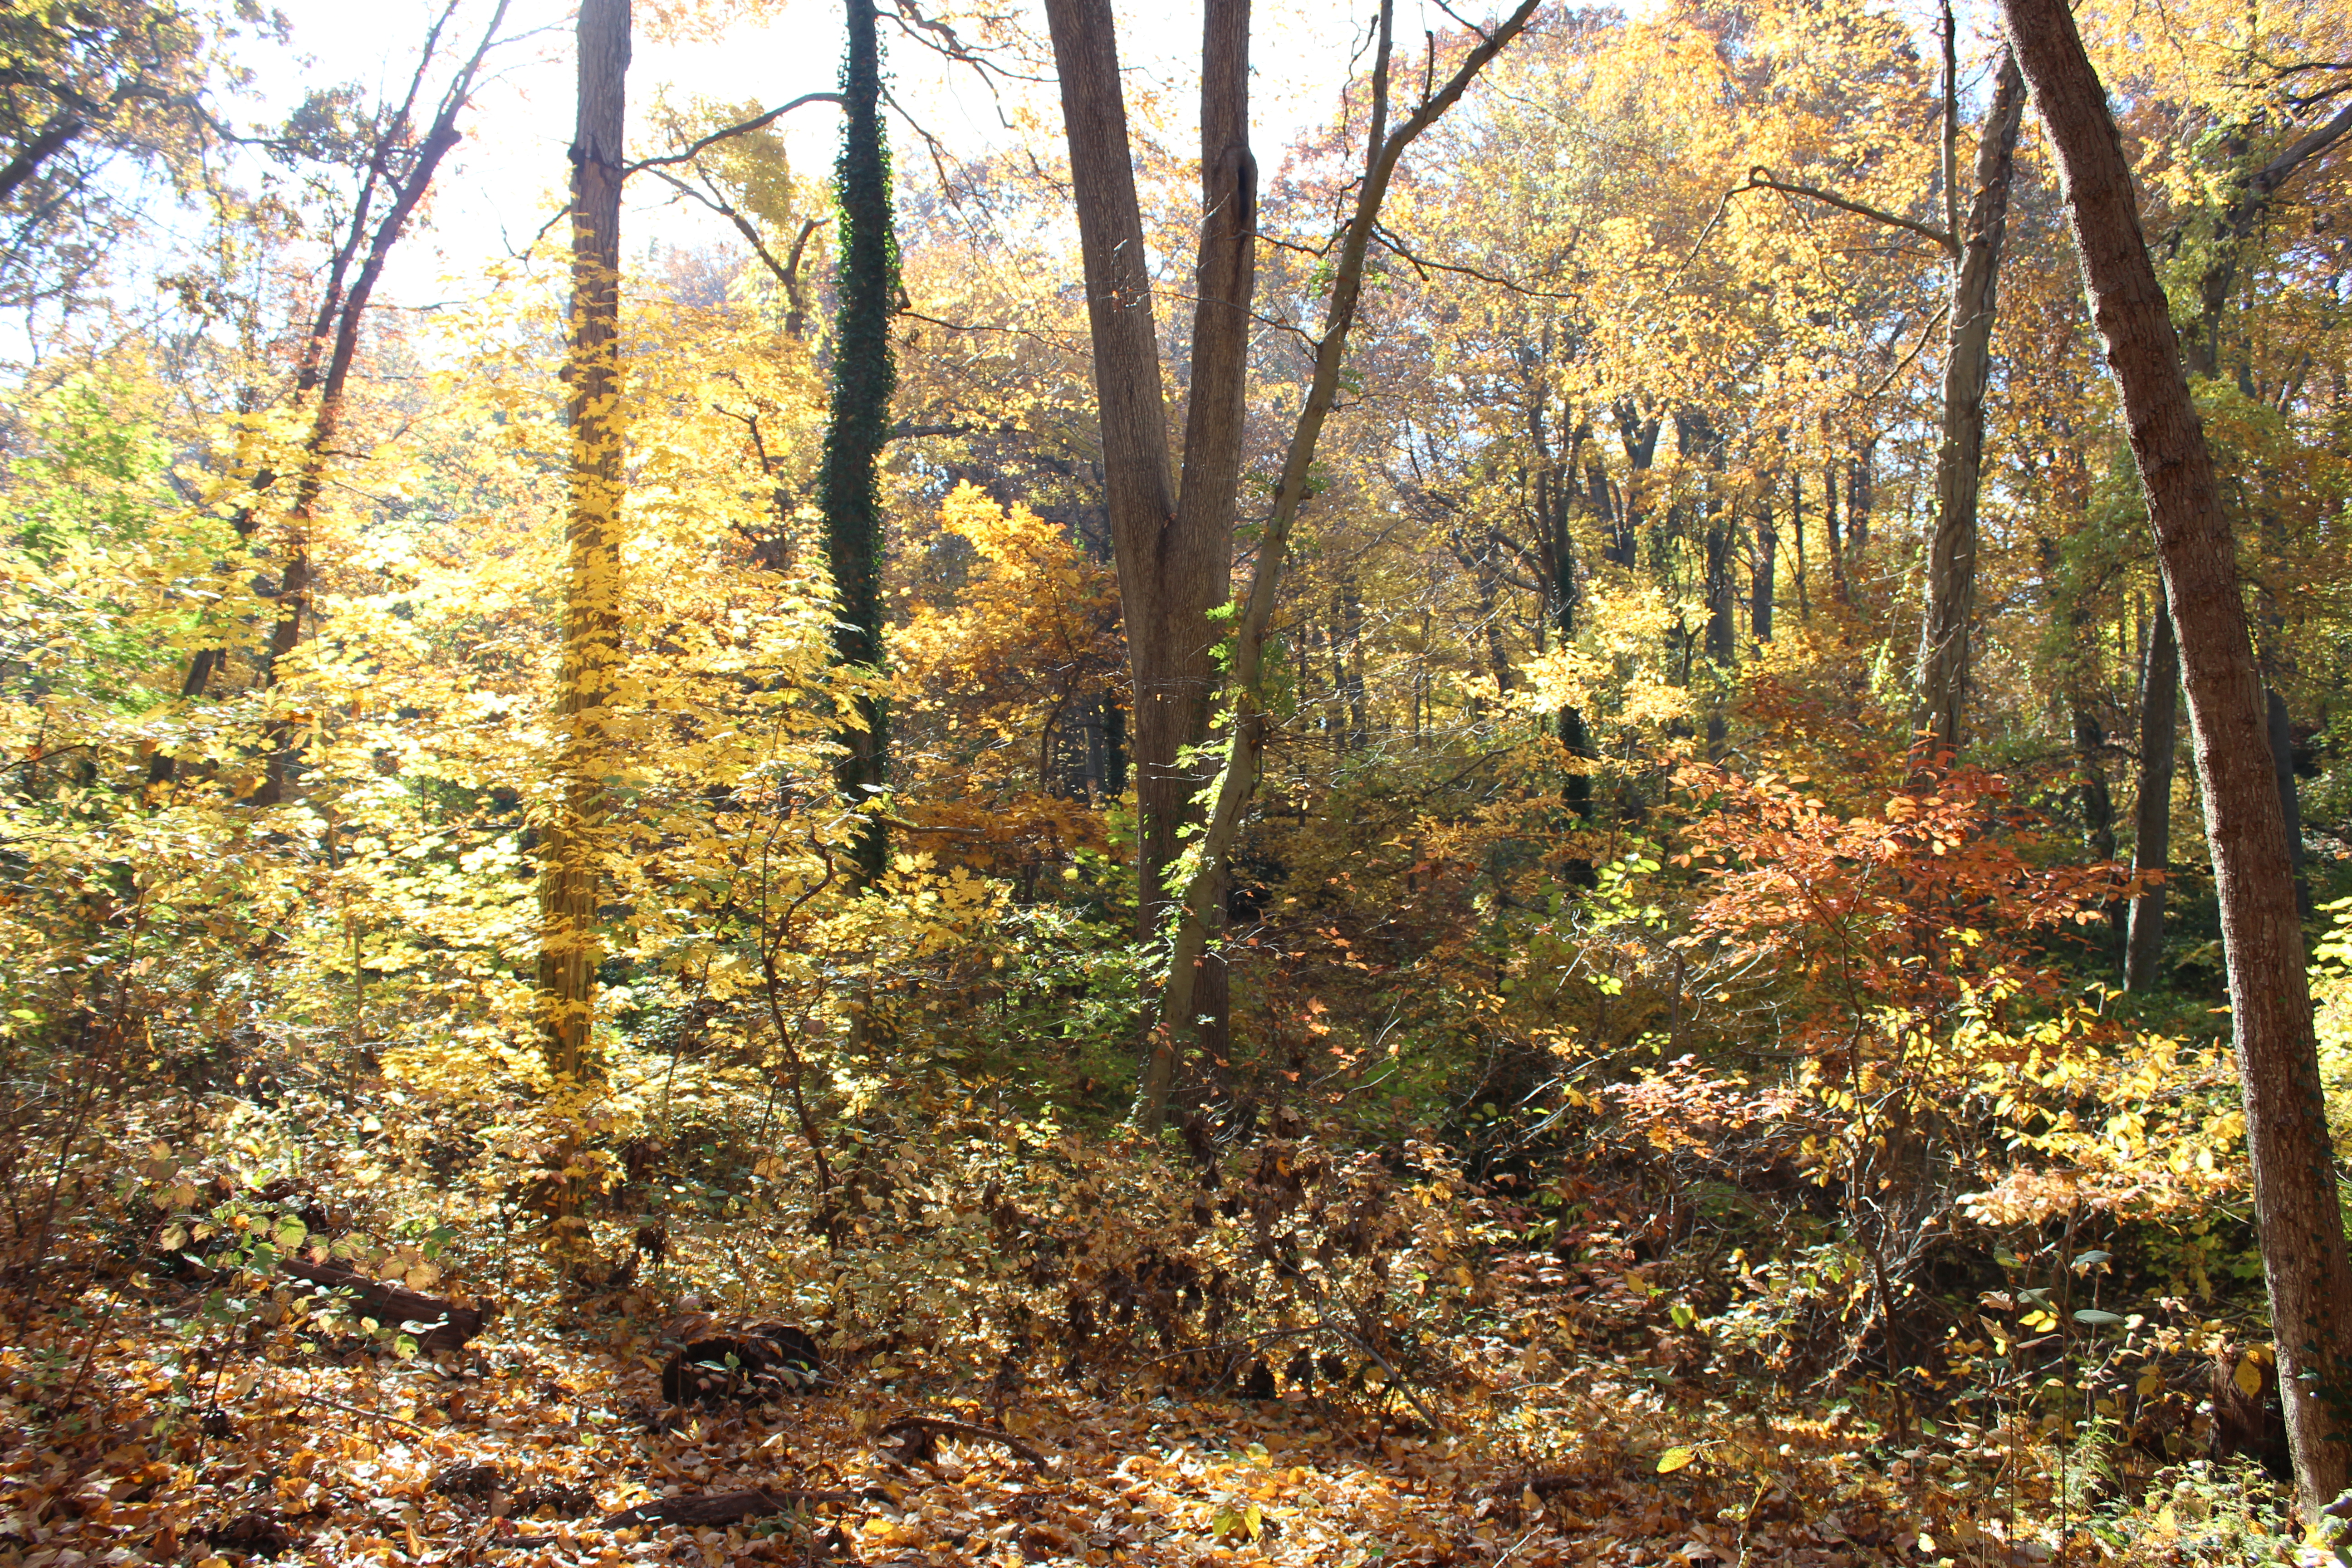 Guided Nature Walk along Autumn woods